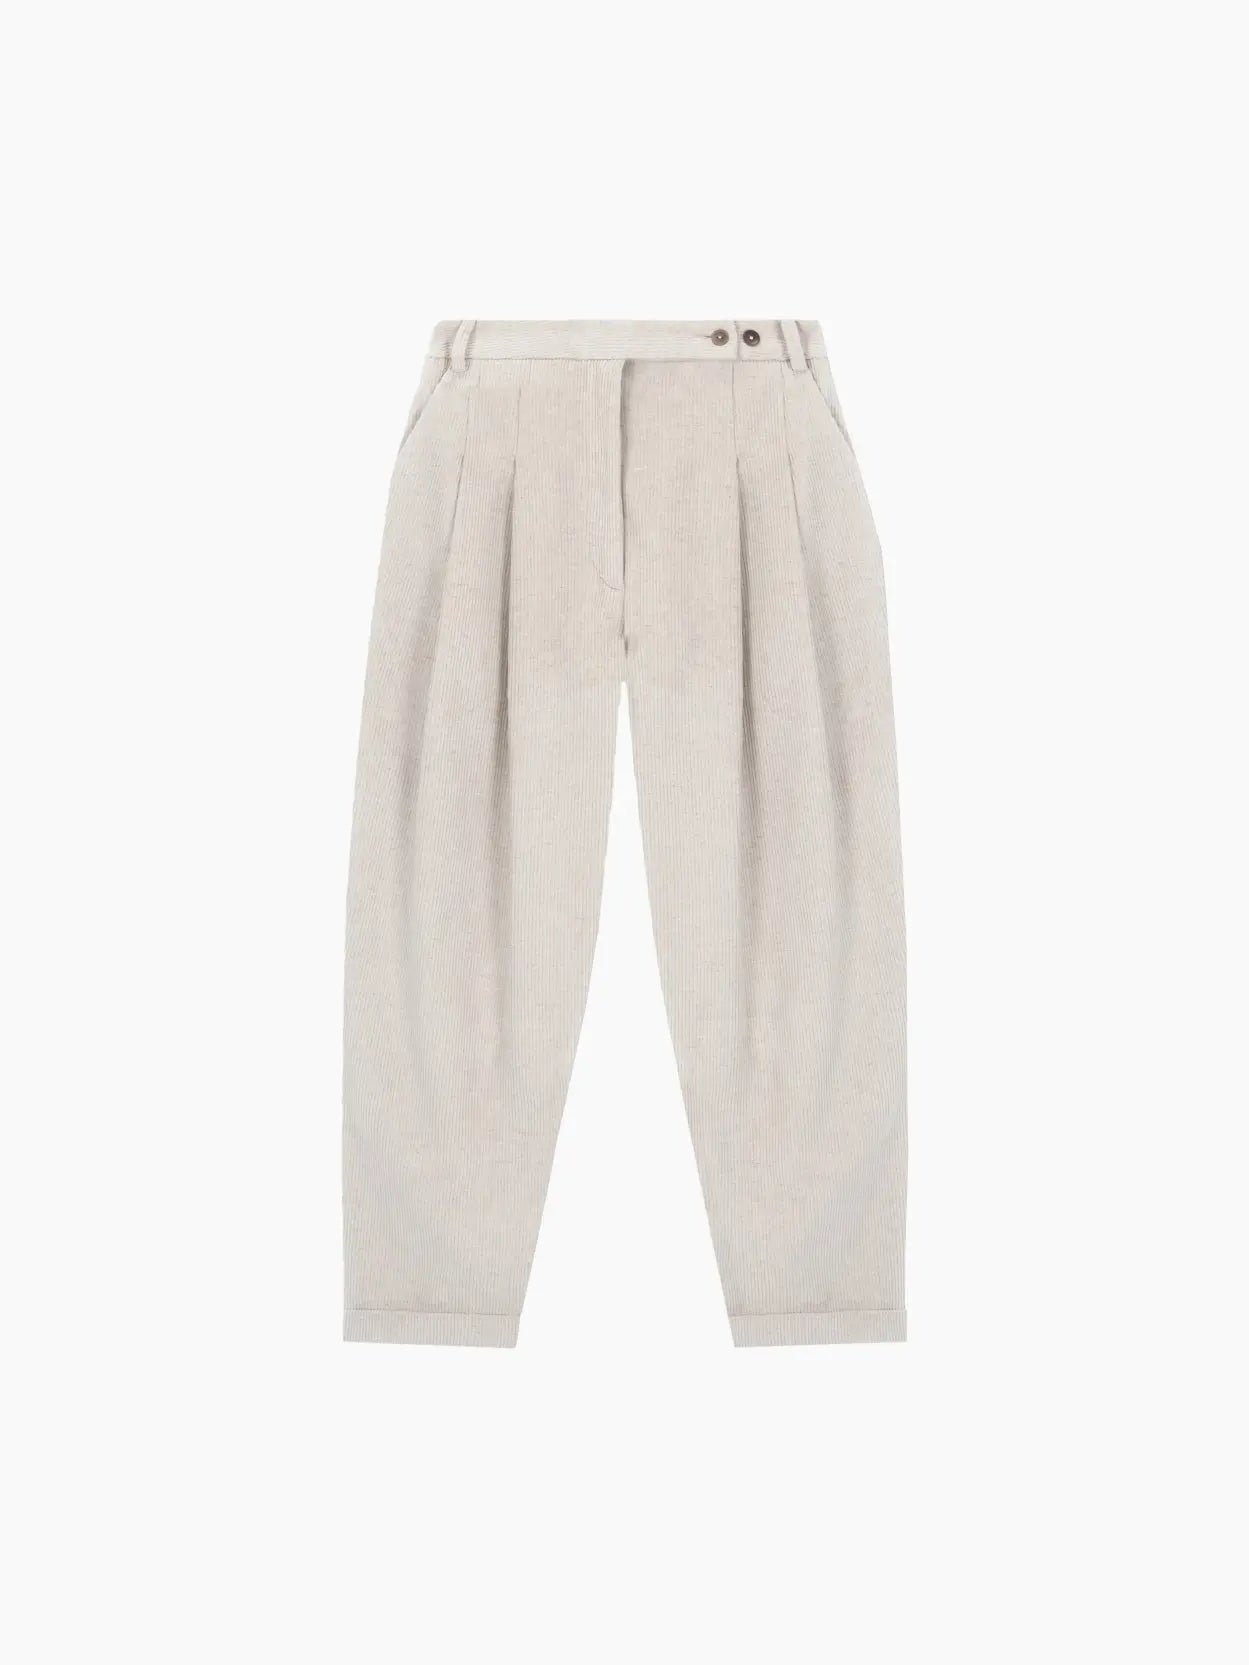 A pair of beige, high-waisted Corduroy Carrot Pants by Cordera with a pleated front and a relaxed, tapered fit. The pants feature a waistband with belt loops and a double-button closure. The legs end in simple cuffs, giving them a polished yet comfortable look, available now at Bassal Store in Barcelona.